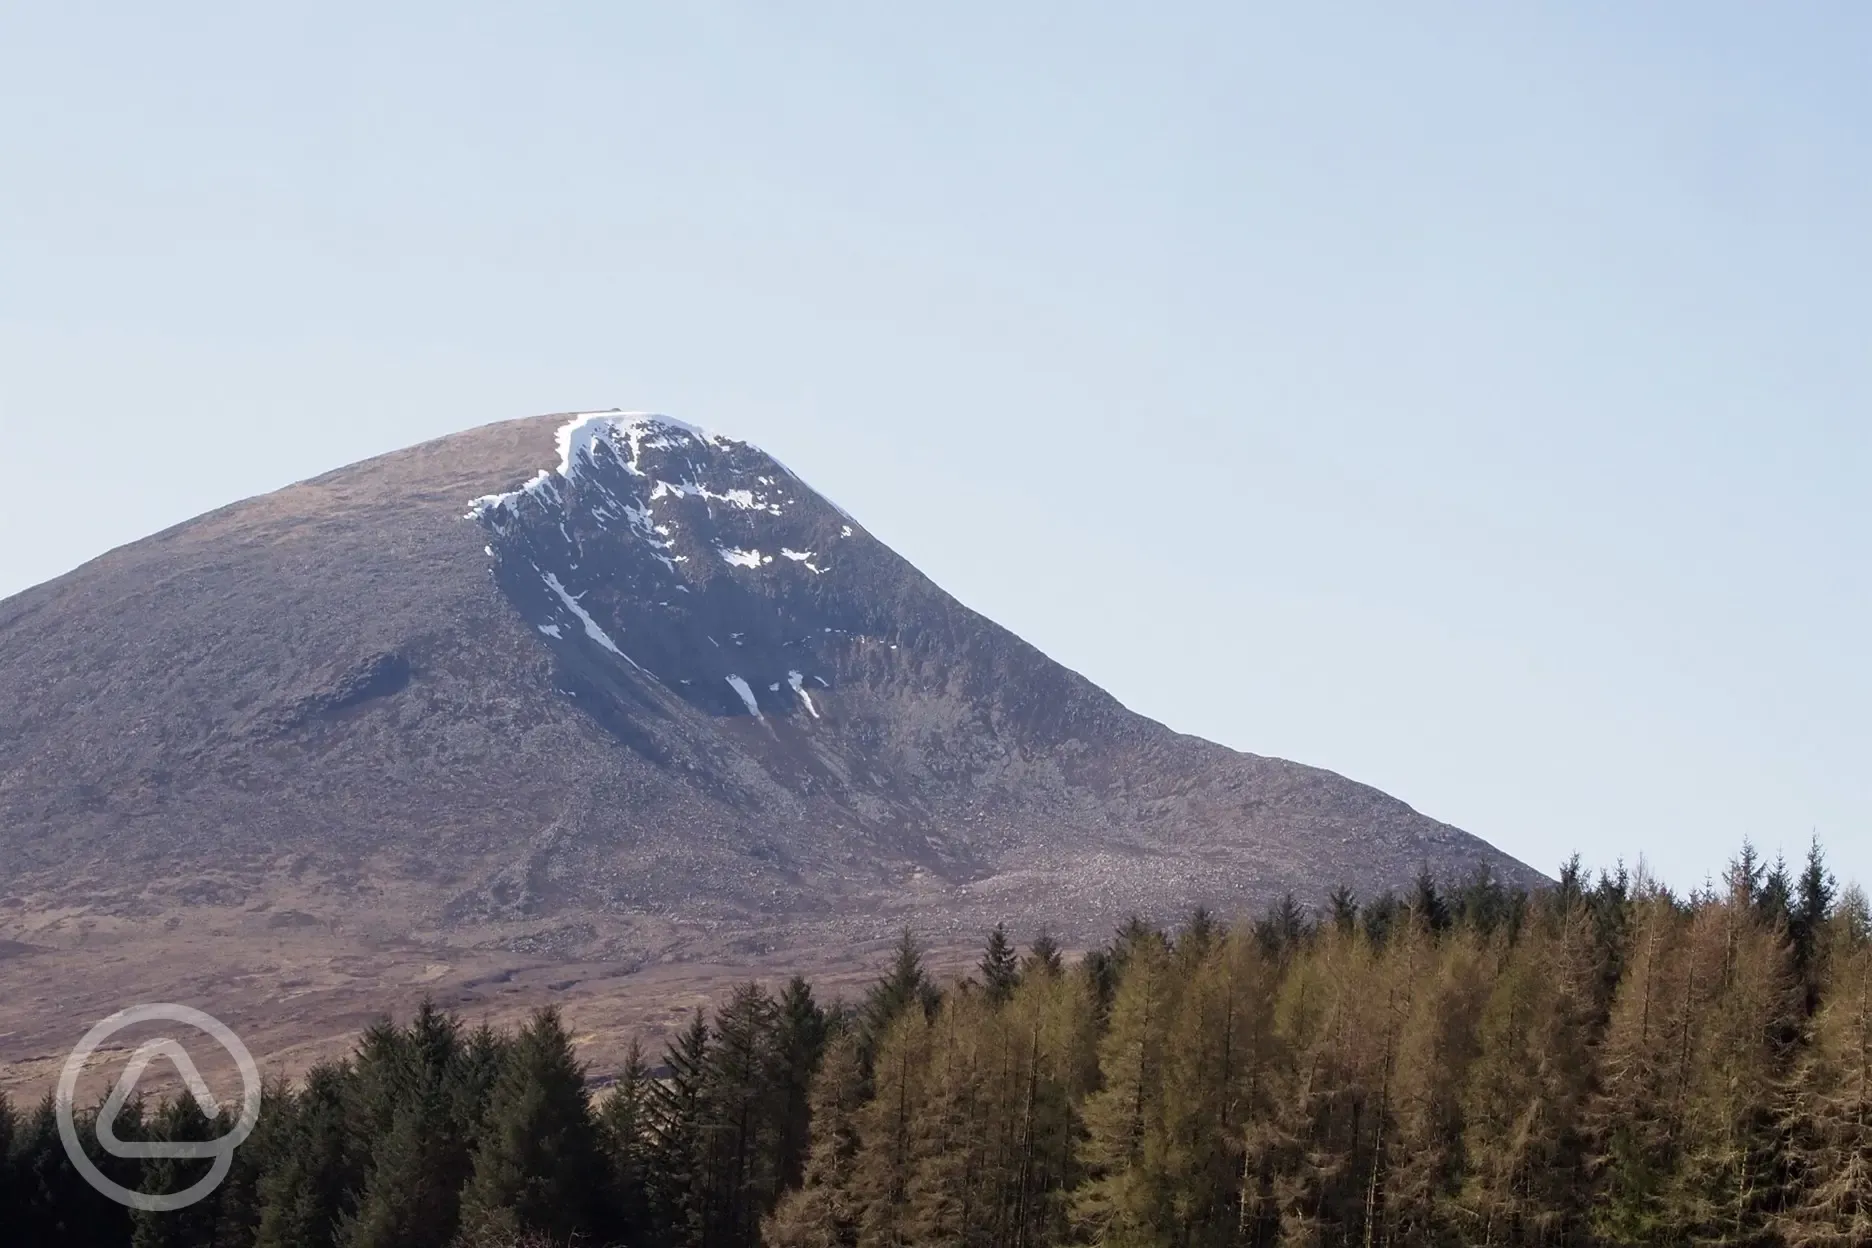 Beinn na Caillich, as seen from the campsite